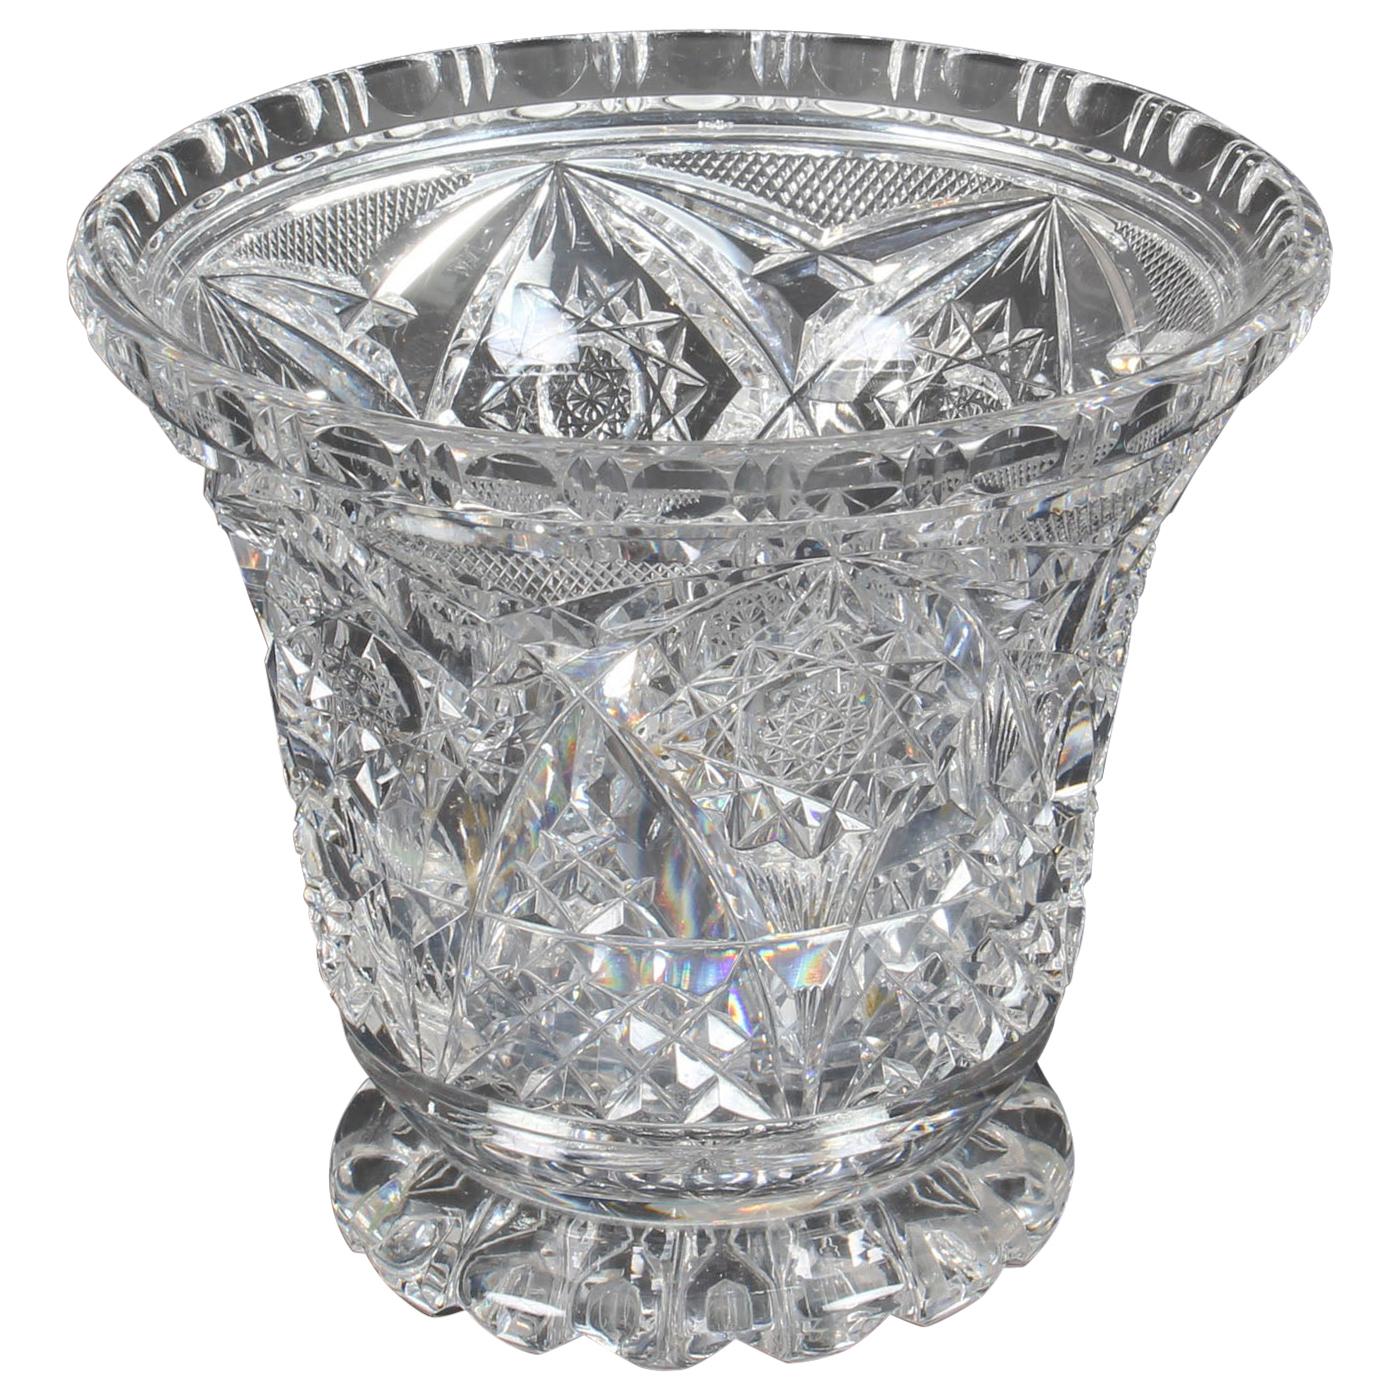 Vintage Cut Glass Crystal Glass Vase, Mid-20th Century For Sale